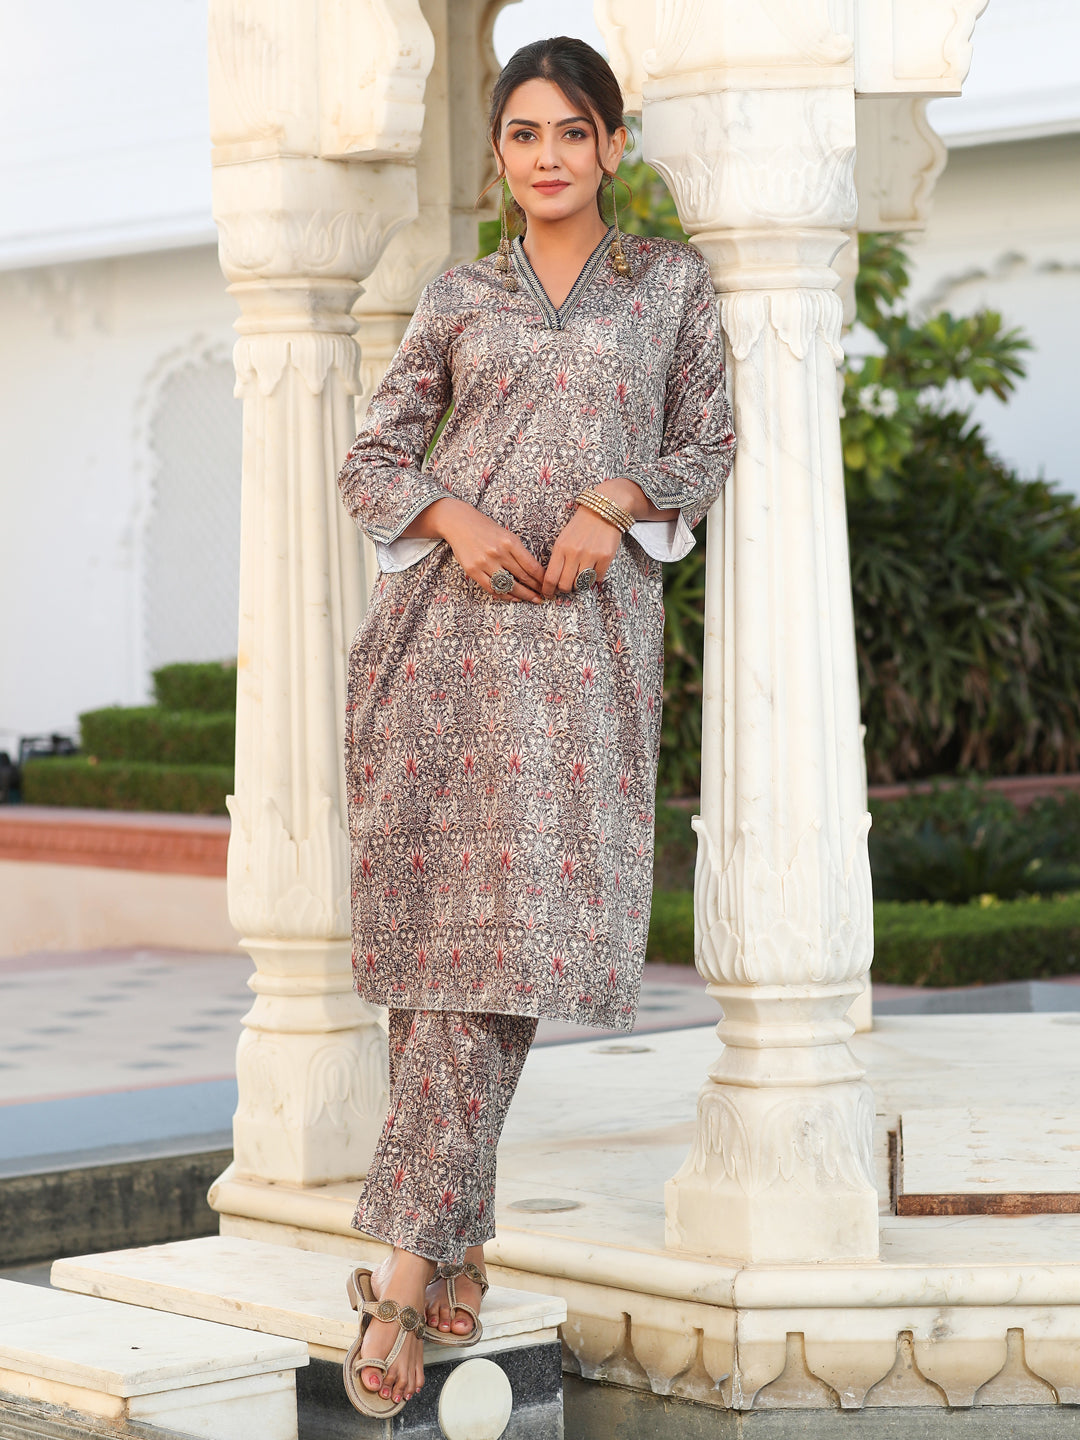 Jaipur Kurti launched its first store in the city, which features its  luxury brand Amaiva and Madhur